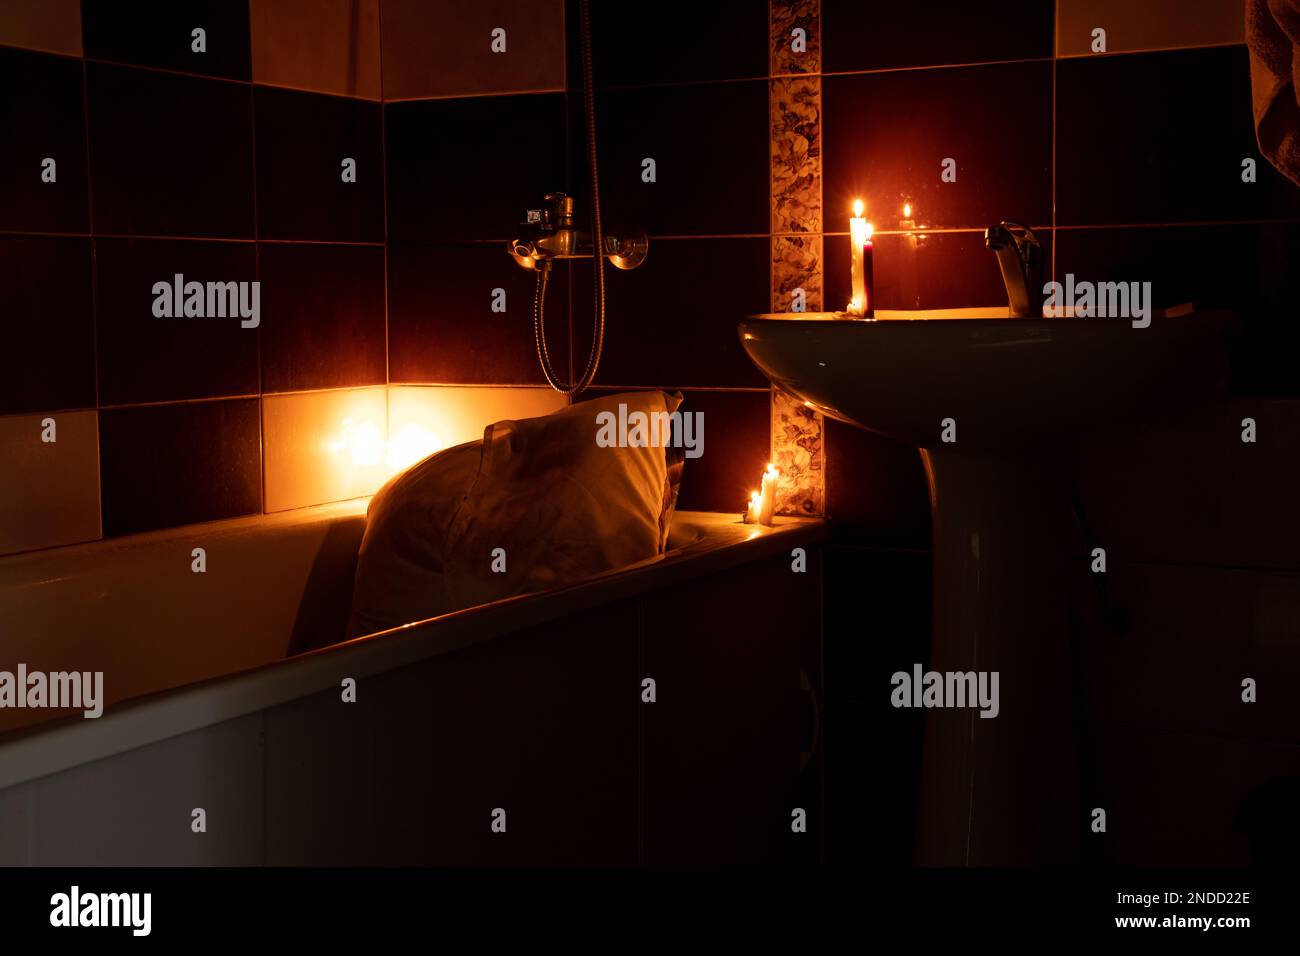 Bathroom as a shelter from rocket attacks in Ukraine by candlelight with a bed in the bathroom without light, war, sleeping in the bathroom Stock Photo